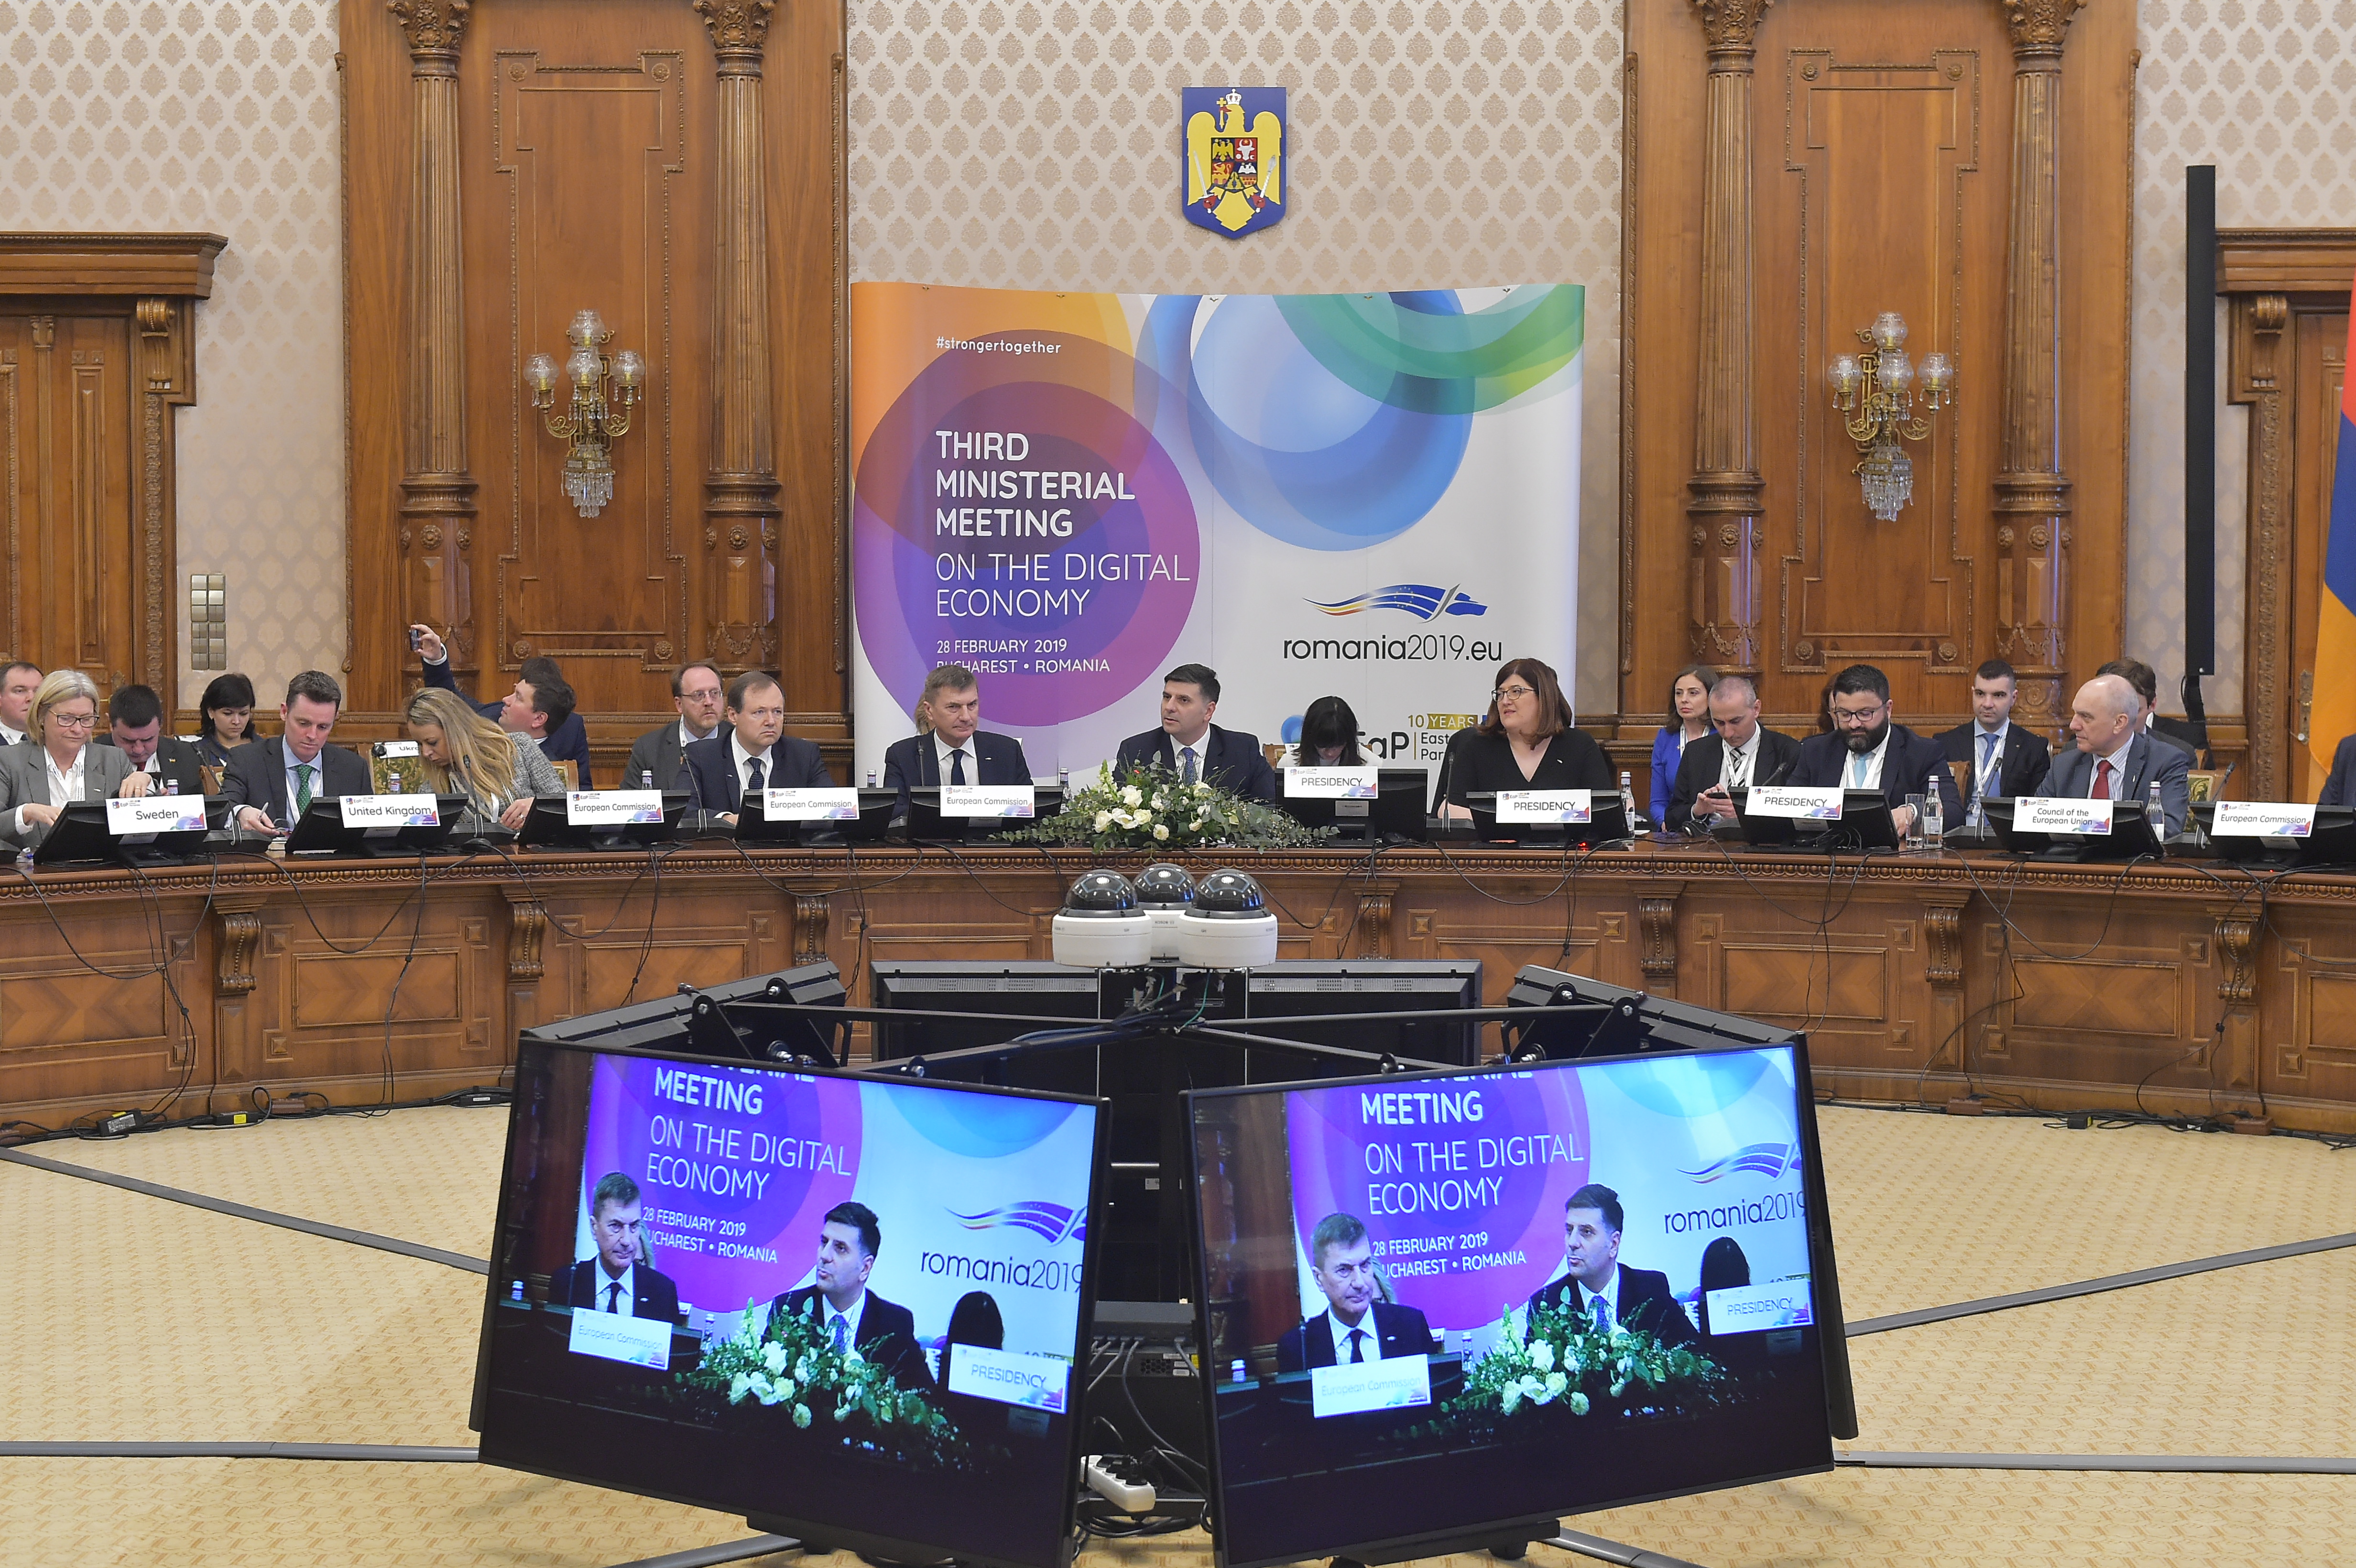 The Eastern Partnership Ministerial Meeting on the Digital Economy in Bucharest